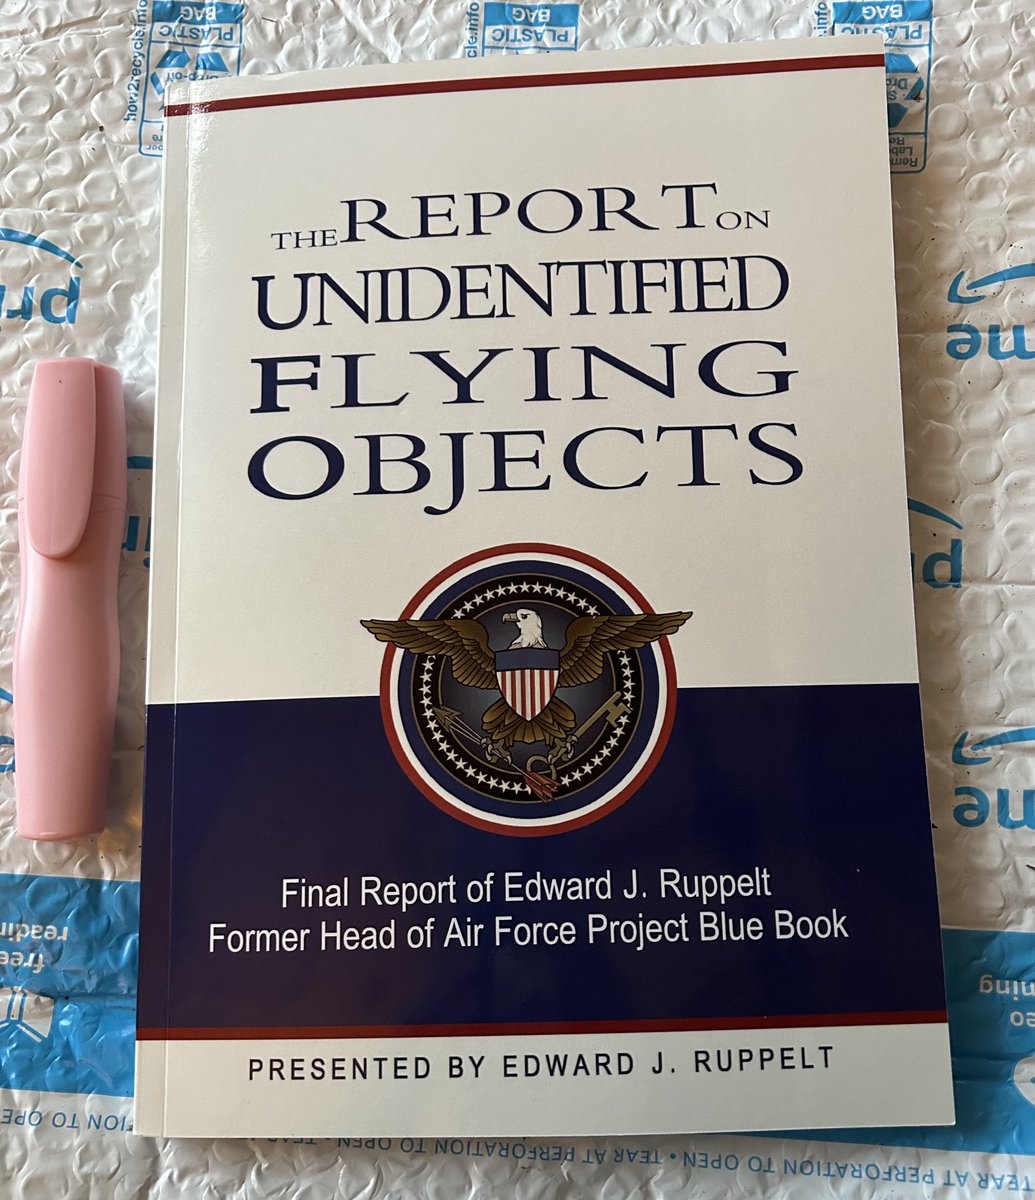 Essential reading added to my collection. #ufo #uap #projectbluebook